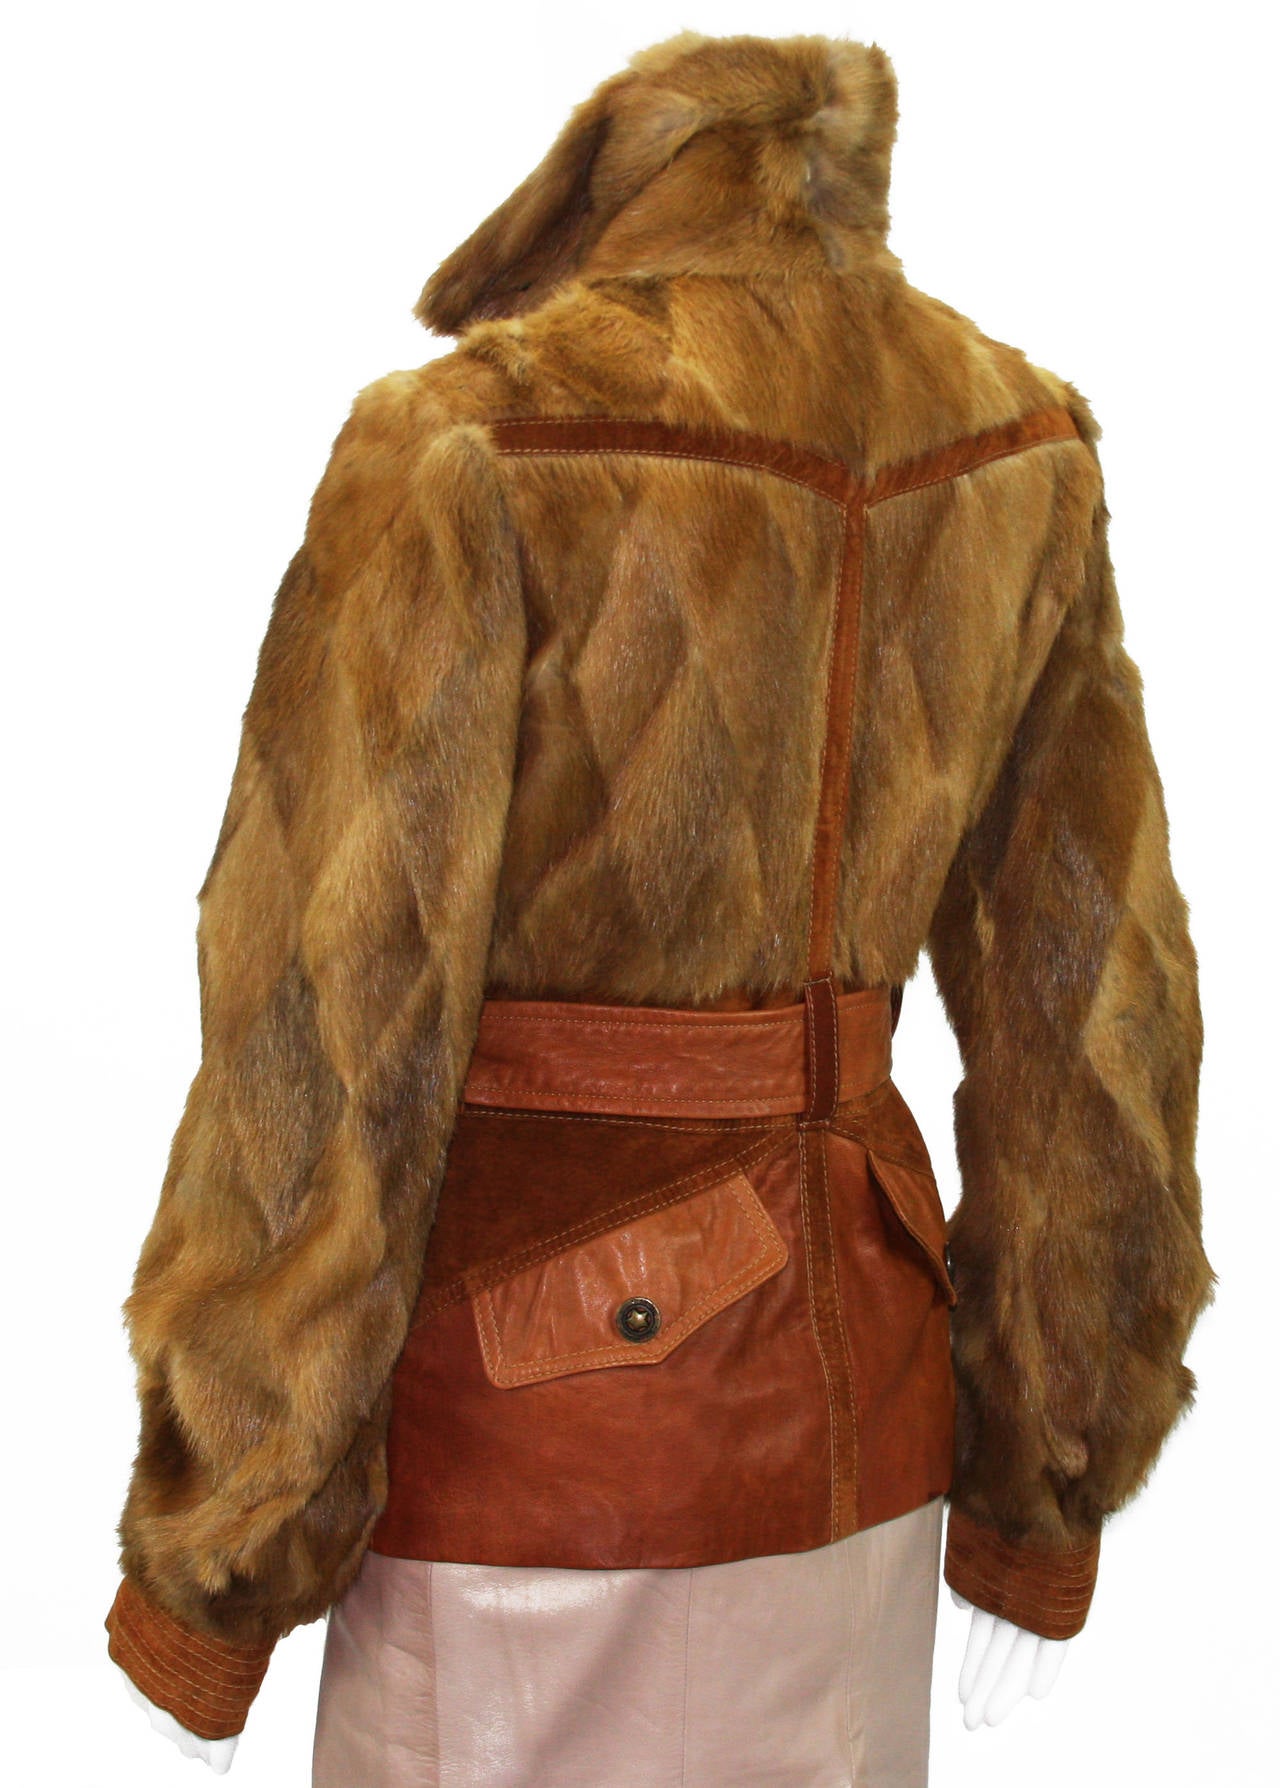 ROBERTO CAVALLI FUR LEATHER WOMEN'S JACKET
JUST CAVALLI COLLECTION
ITALIAN SIZE 40 – US 4
COMPOSITION – WEASEL, LEATHER, SUEDE
COLOR – CHESTNUT
TWO POCKETS AT FRONT
FOUR FLAP POCKETS WITH SNAP BUTTON CLOSURE
REVERSIBLE BELT (LEATHER / SUEDE)